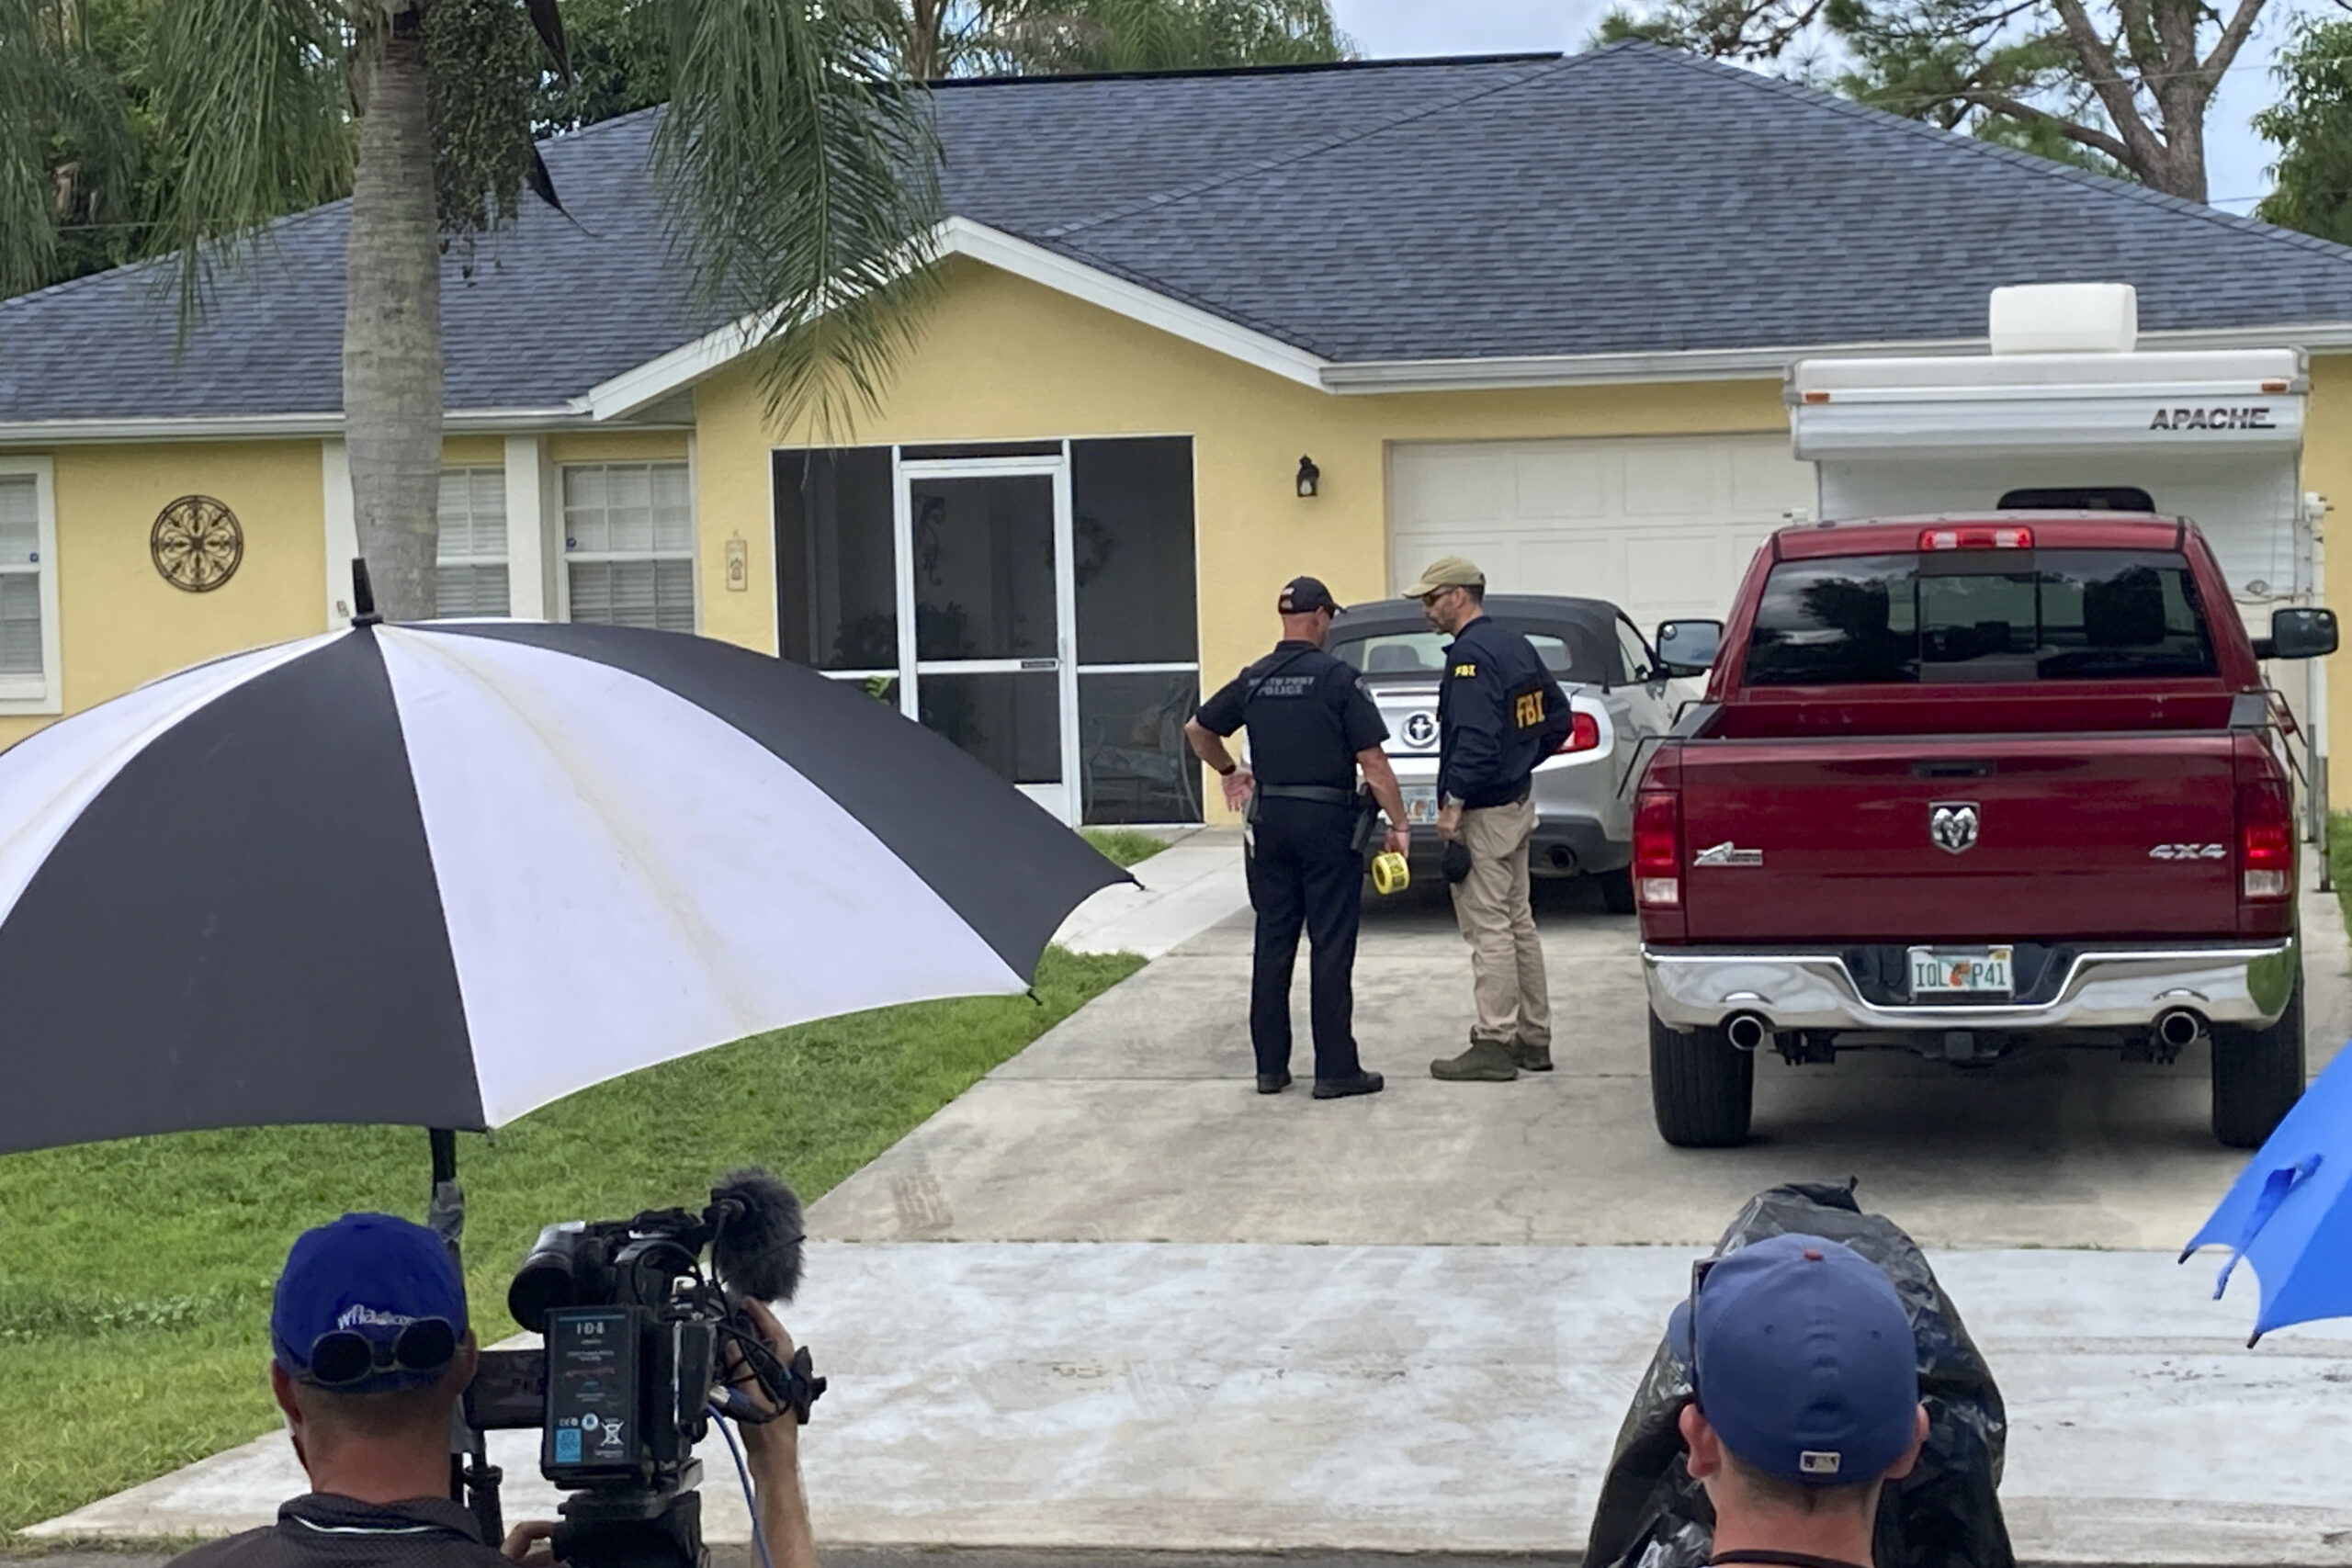 Law enforcement officials investigate home of a young man wanted for questioning in the disappearance of his girlfriend, Gabby Petito, on Monday, Sept. 20, 2021 in North Port, Fla. The officers served a search warrant at the home of the parents of her 23-year-old boyfriend Brian Laundrie, who is wanted for questioning. (AP Photo/Curt Anderson)